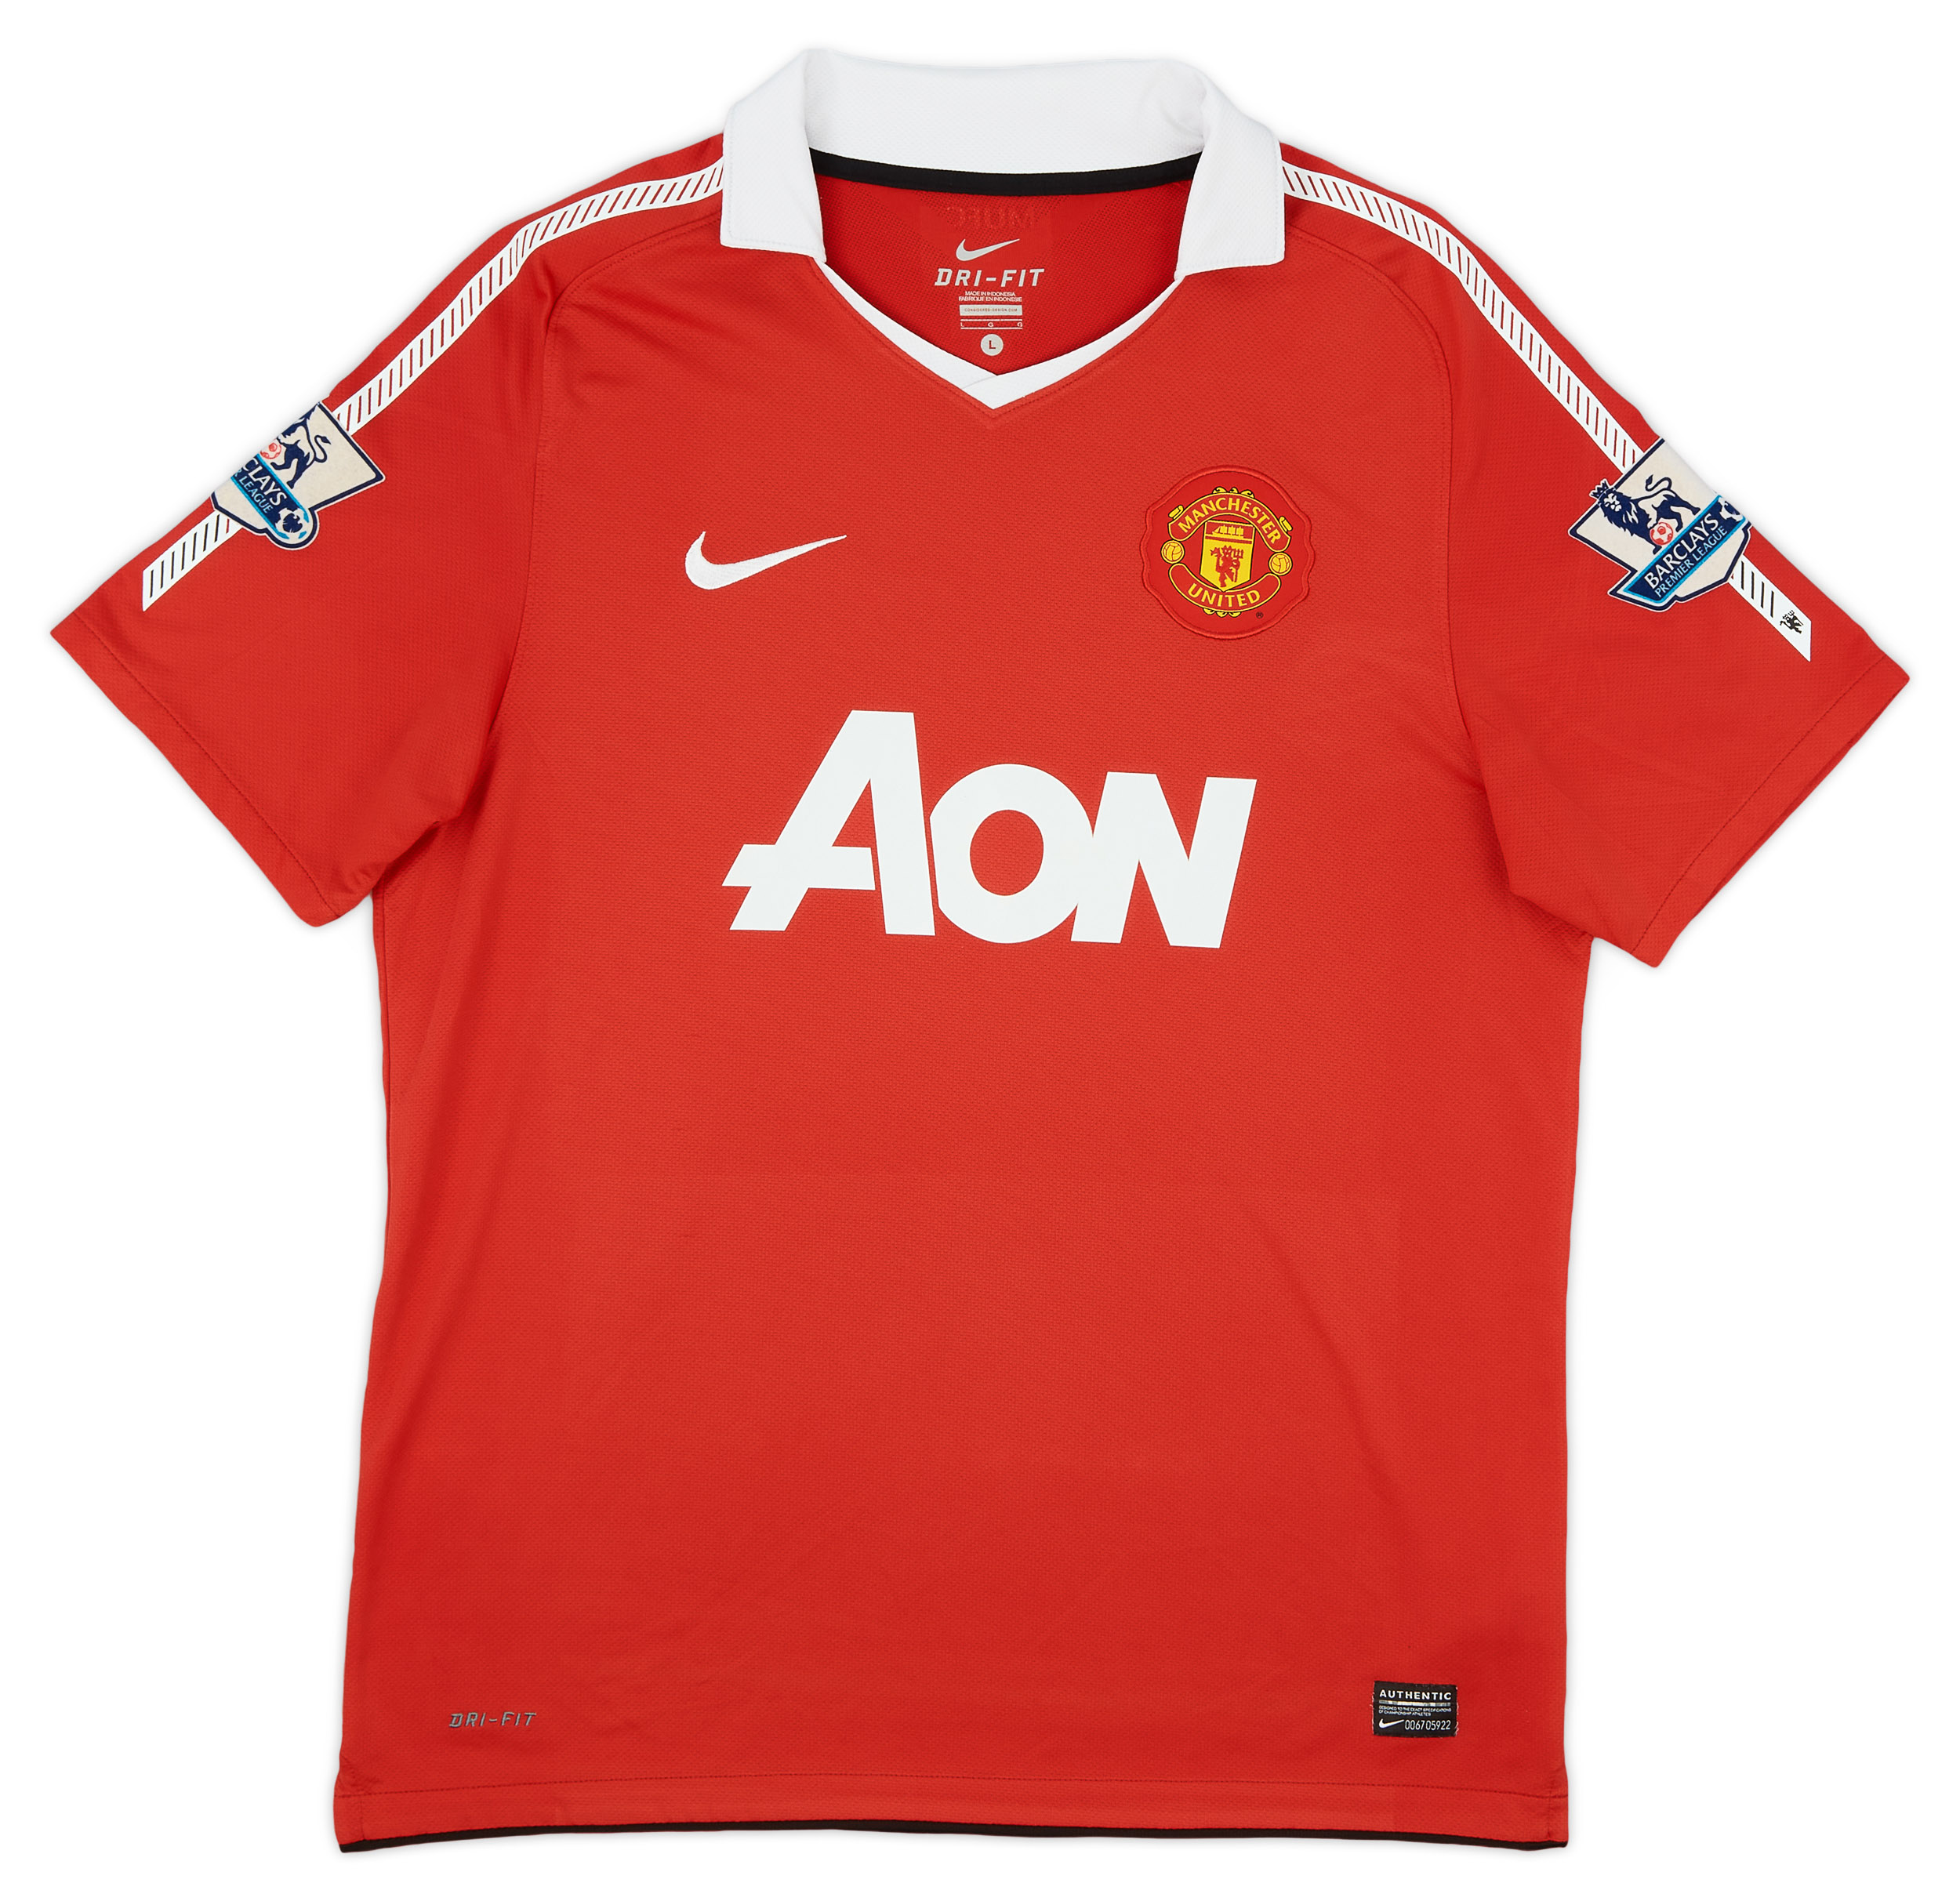 2010-11 Manchester United Home Shirt - Excellent 9/10 - ()